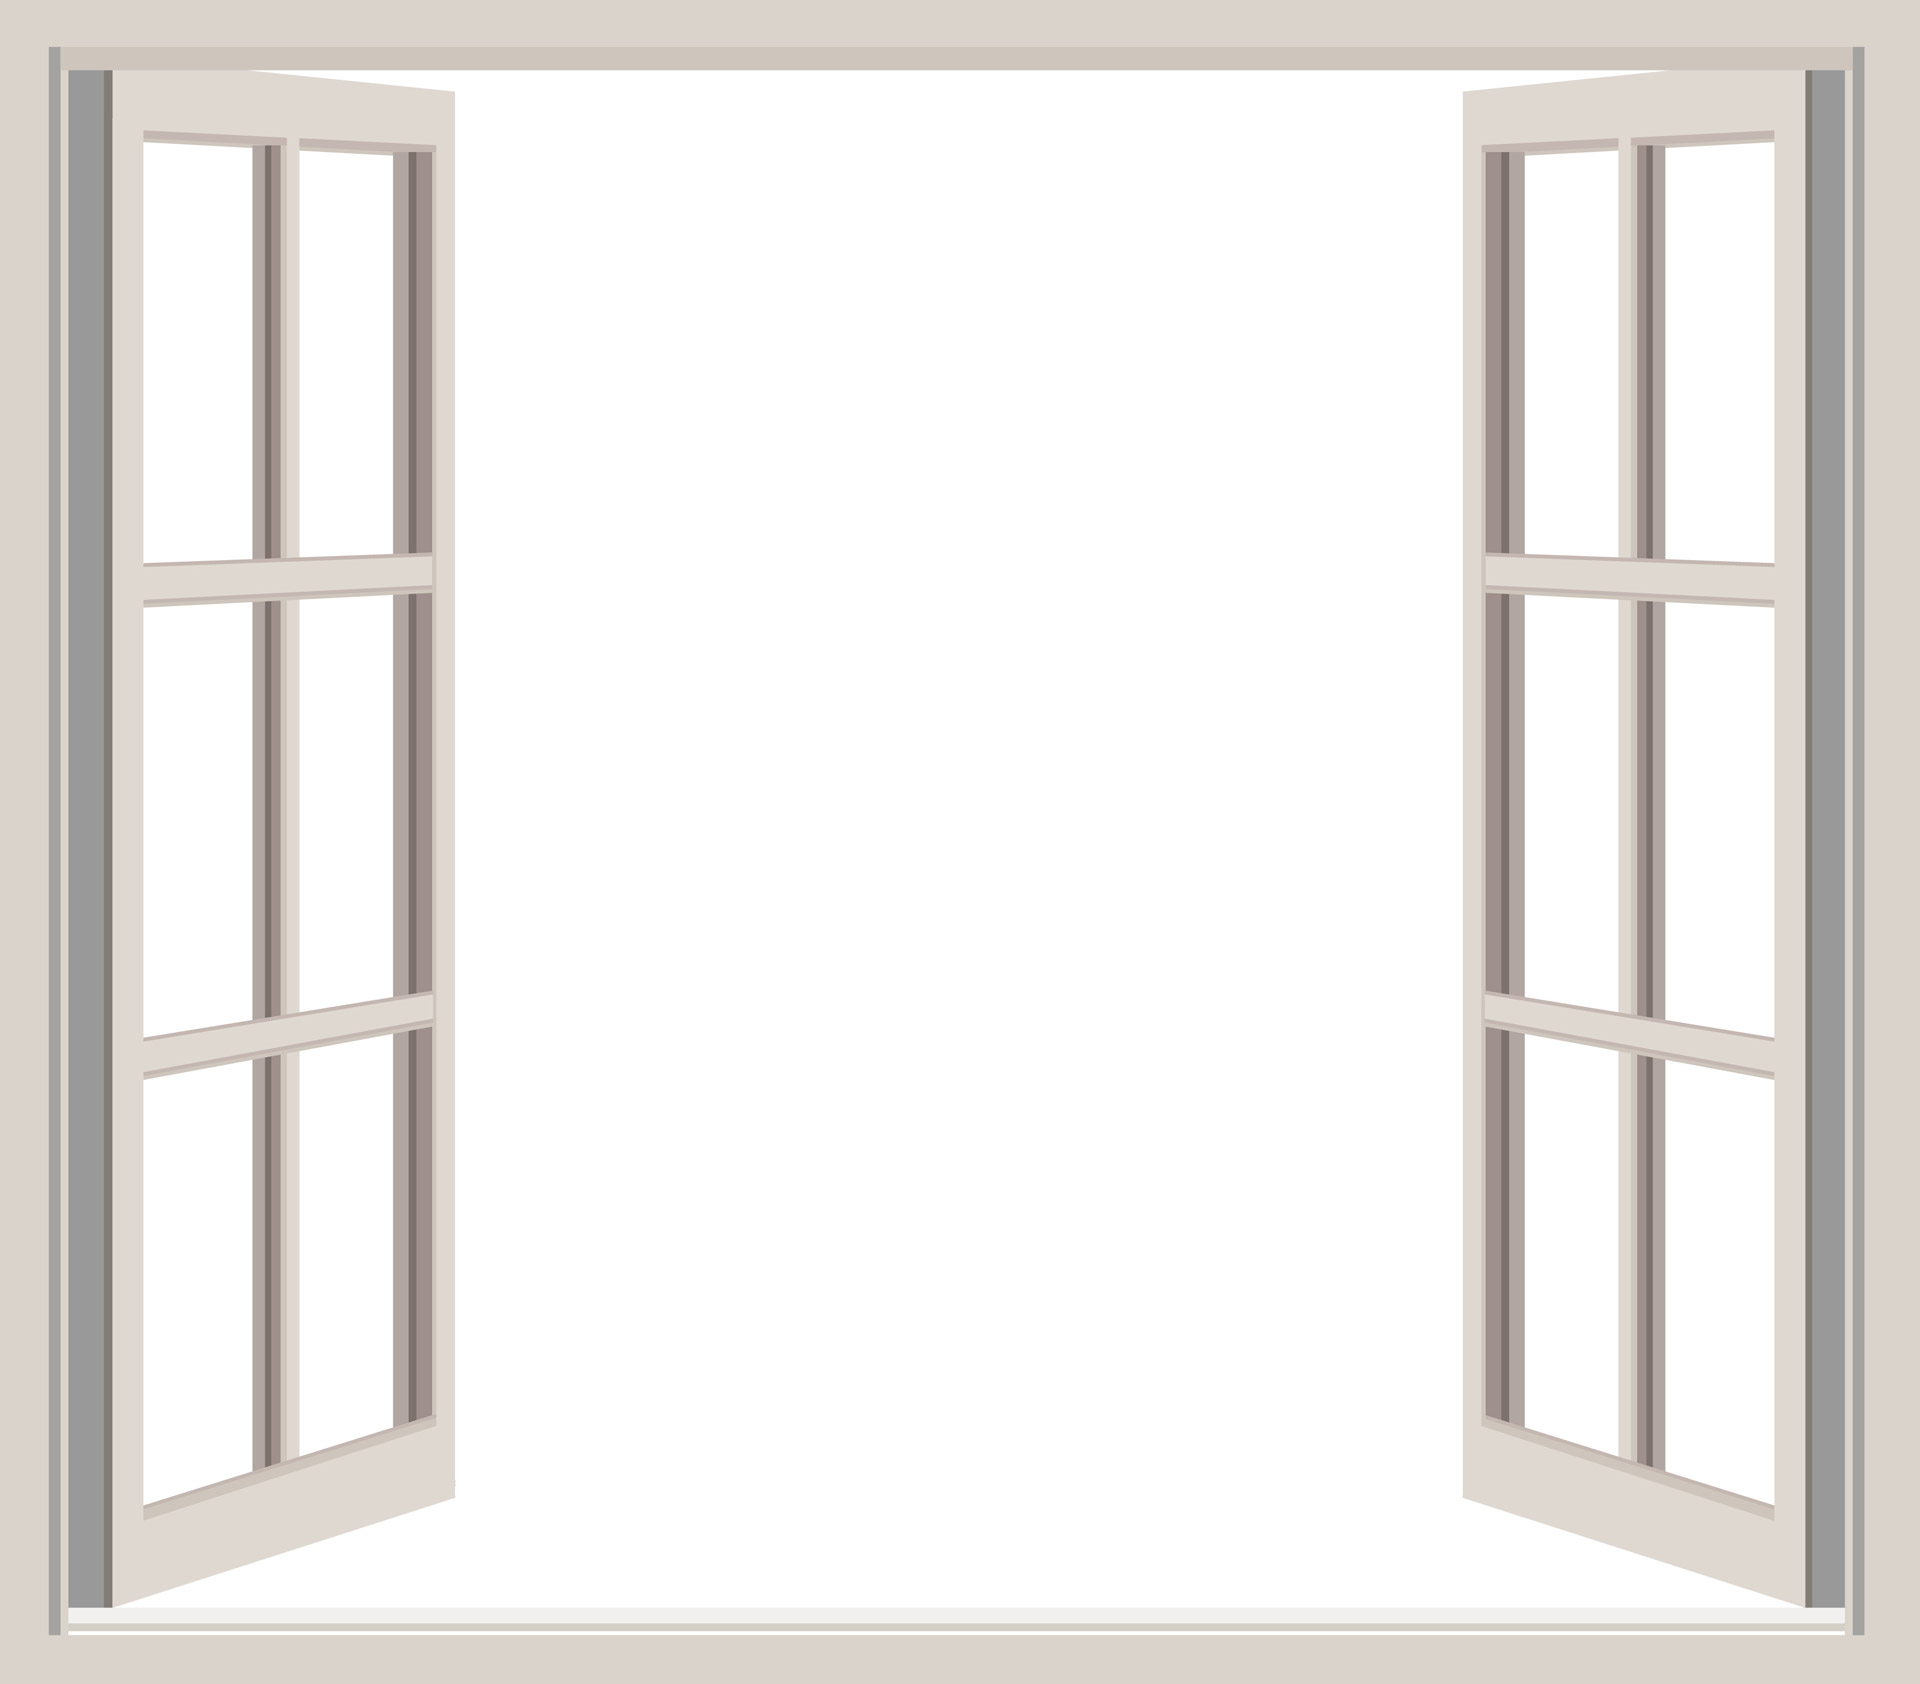 Open window frame clipart free stock photo public domain pictures